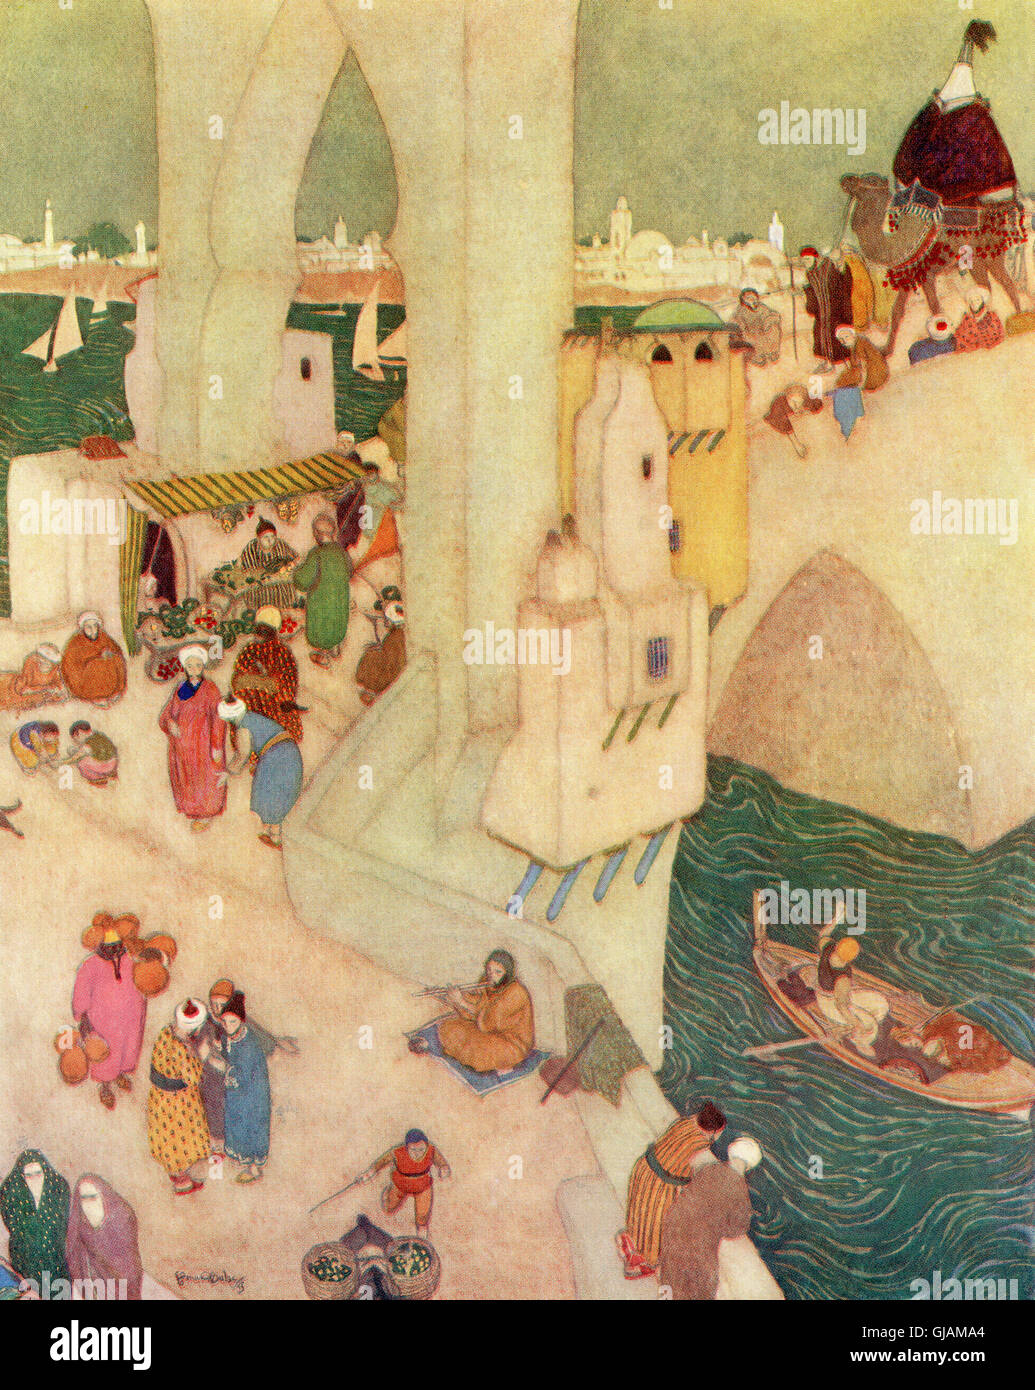 In the city of Baghdad.  Illustration by Edmund Dulac for Sindbad The Sailor. Stock Photo